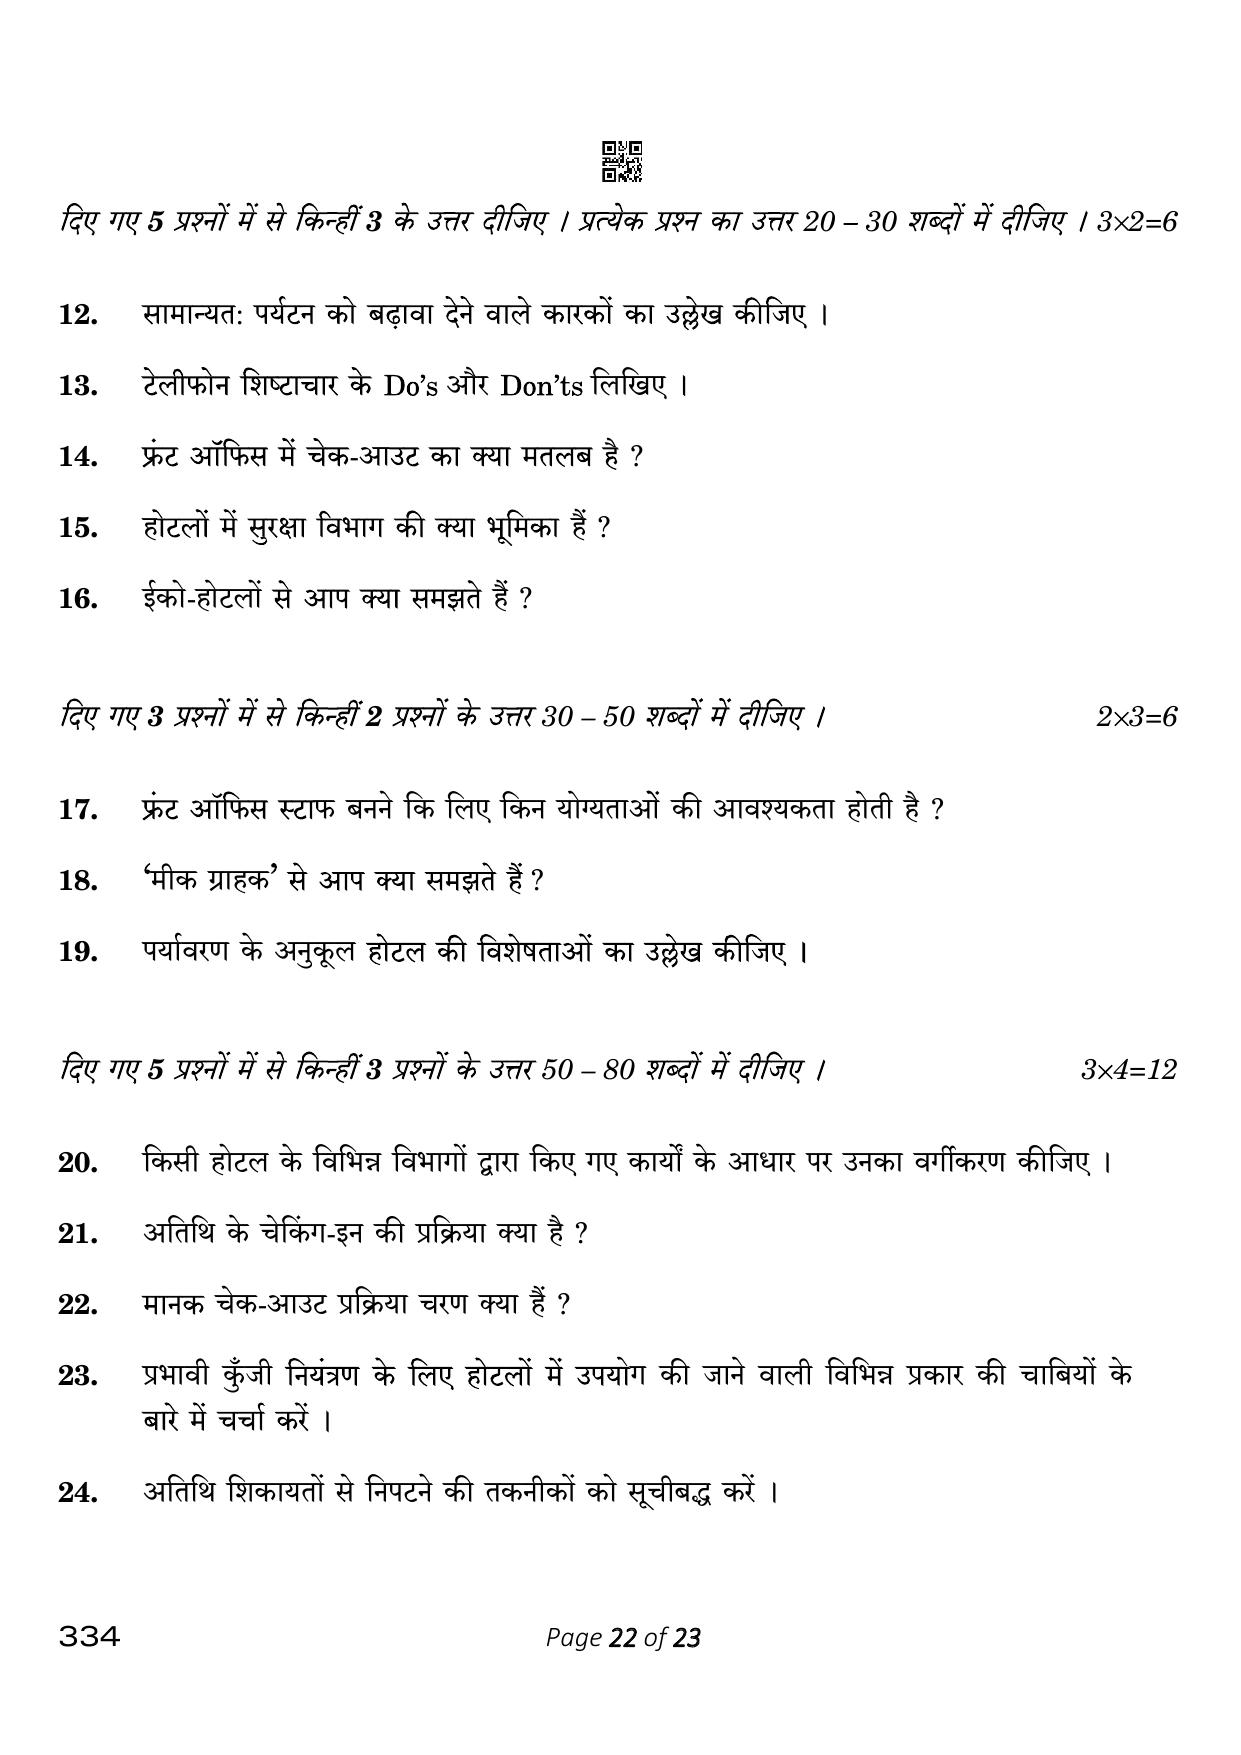 CBSE Class 12 334_Front Office Operations 2023 Question Paper - Page 22